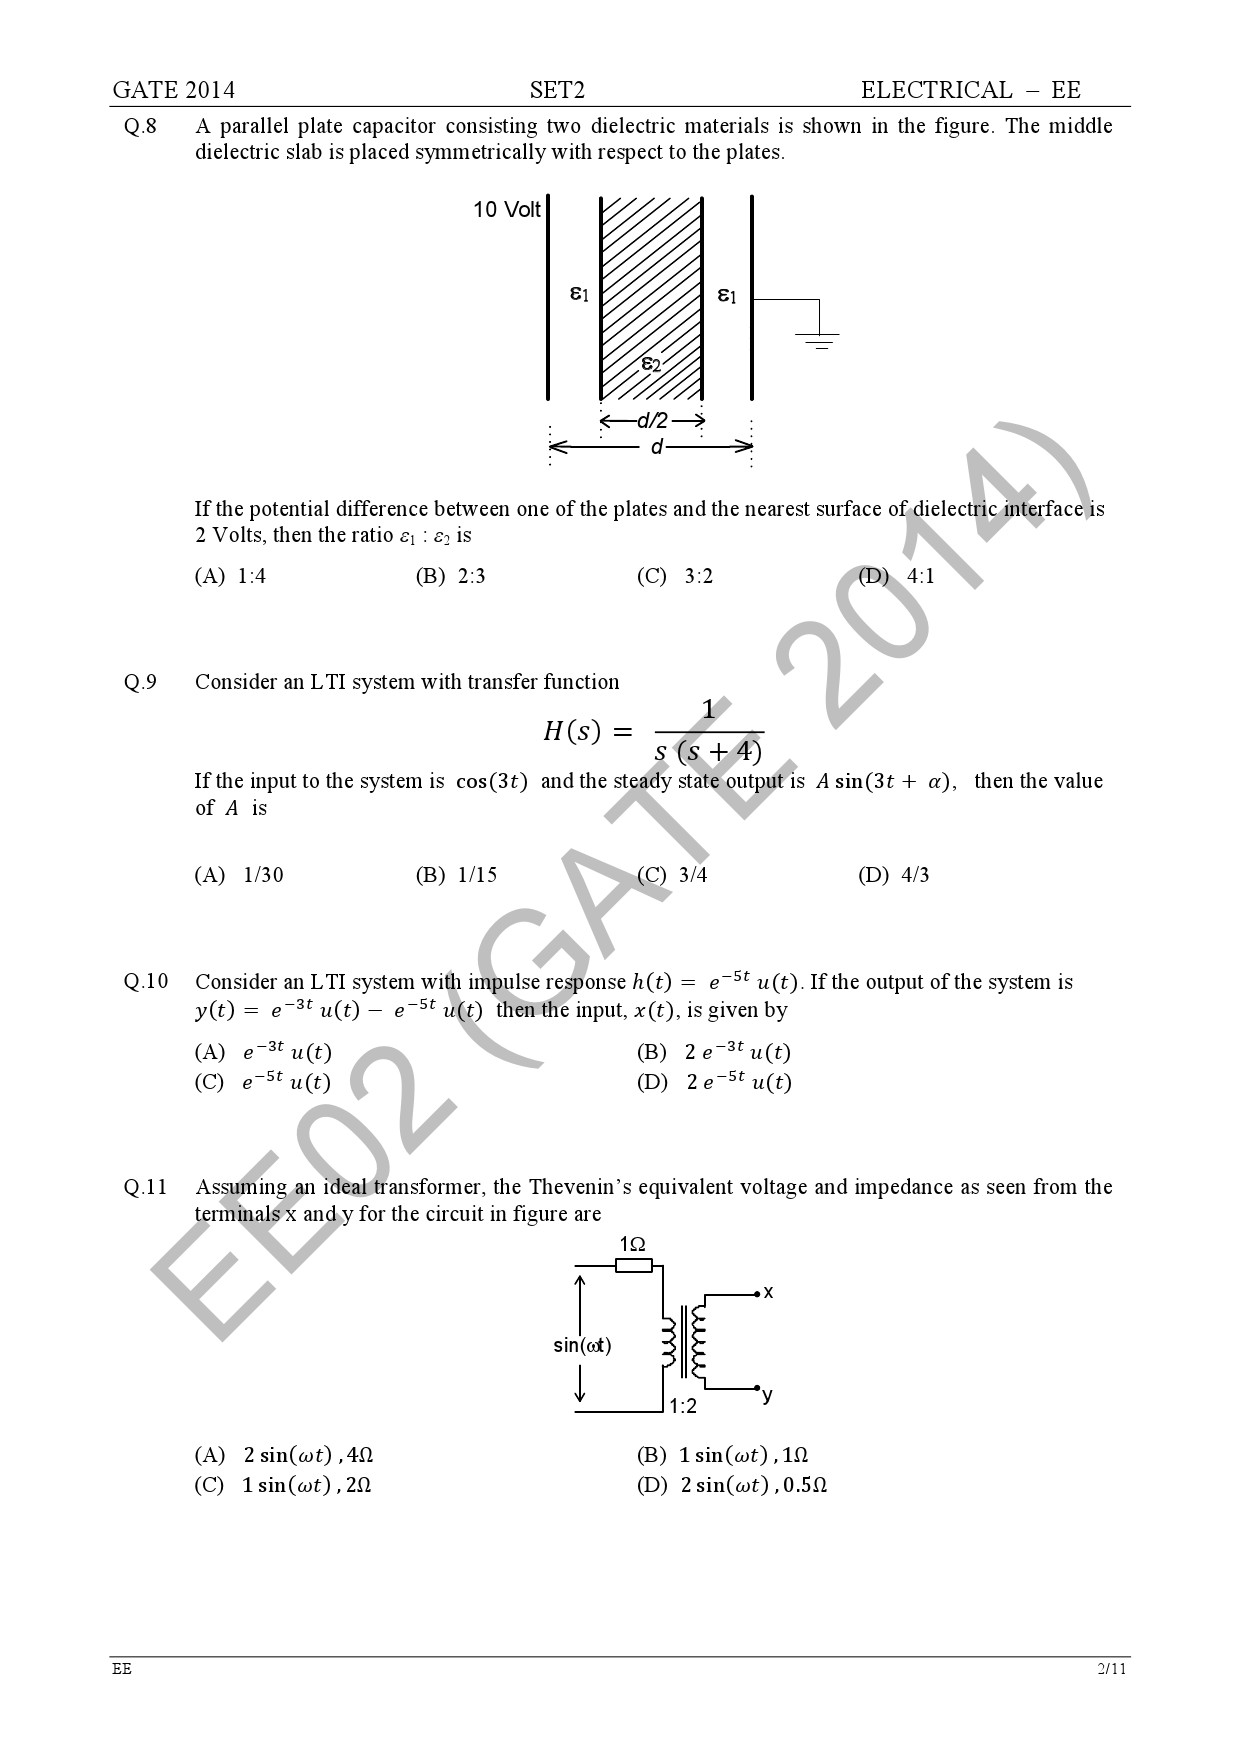 GATE Exam Question Paper 2014 Electrical Engineering Set 2 8